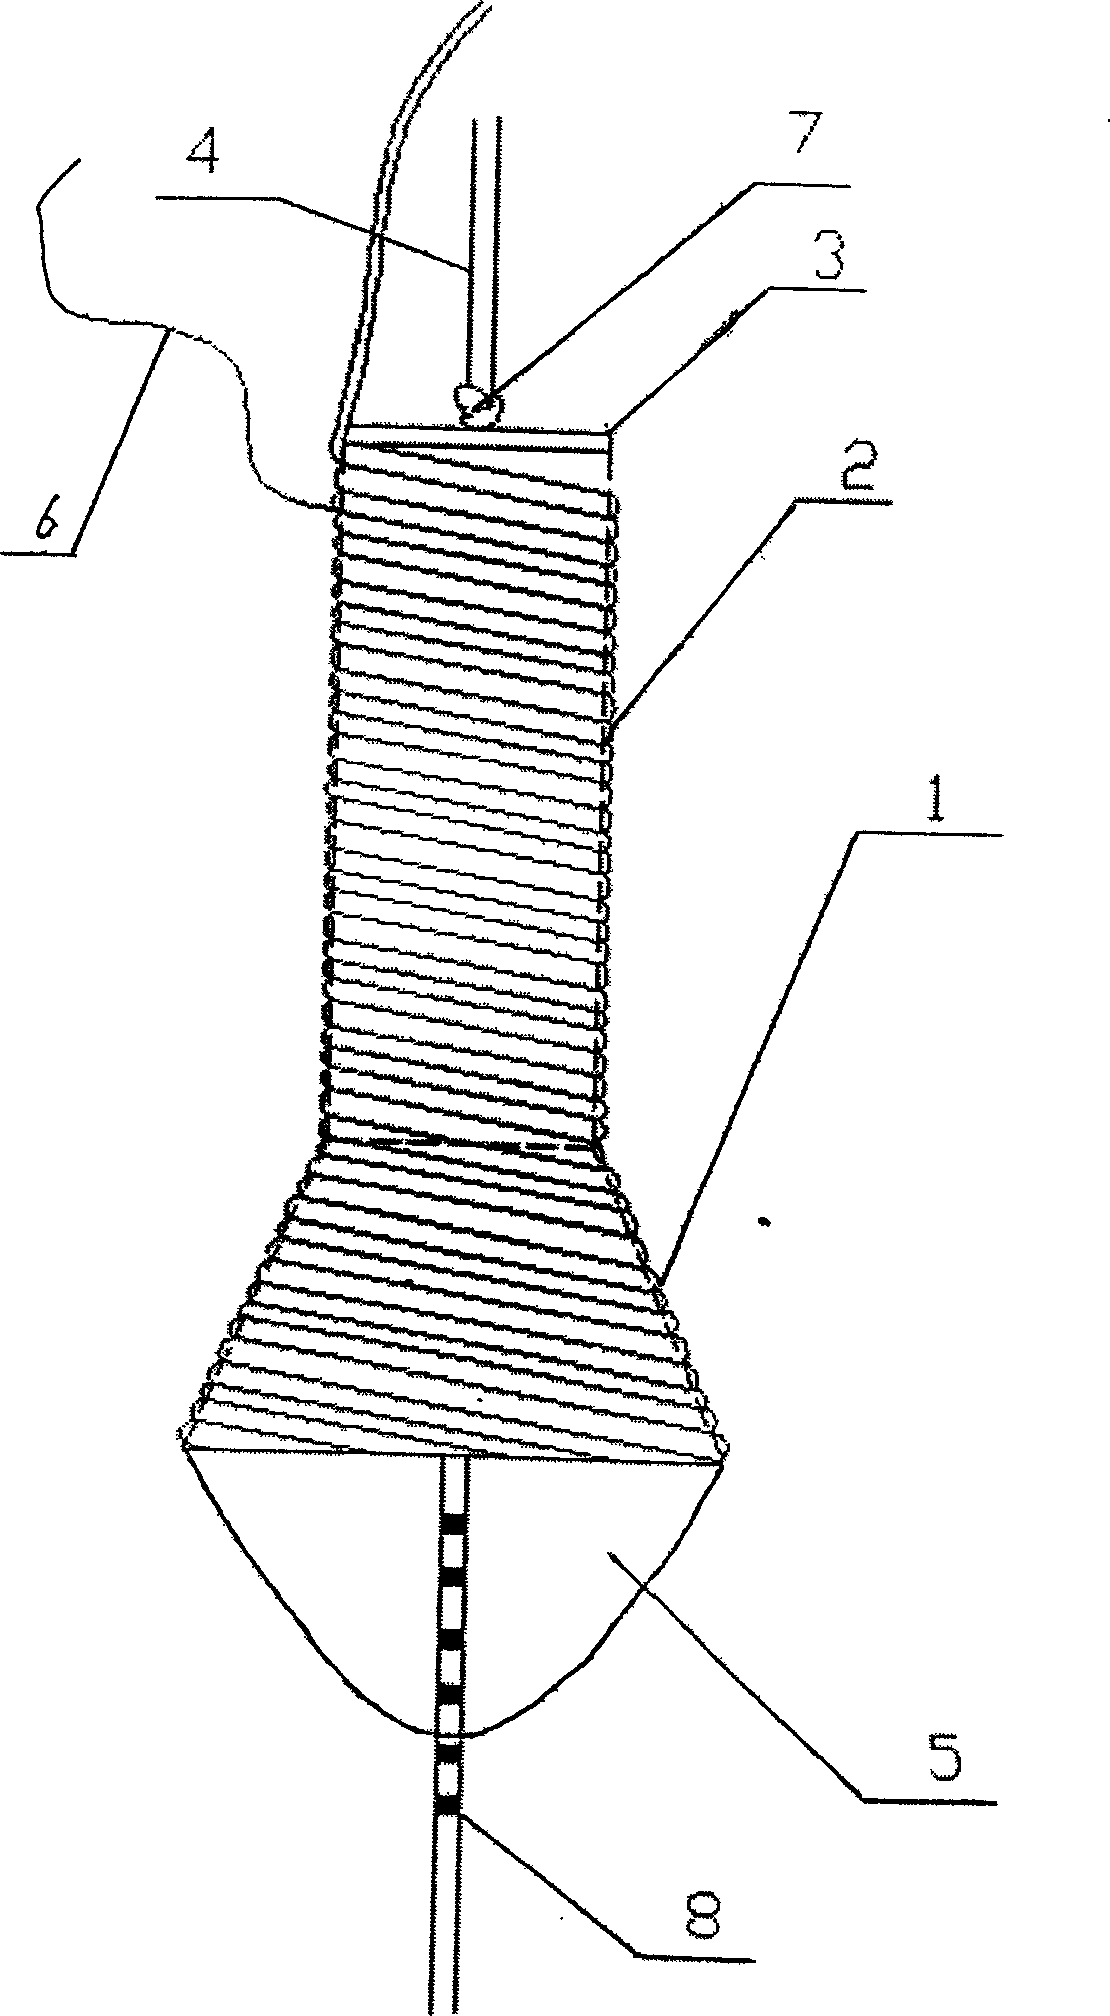 Lacrimal stent, and application method therefor